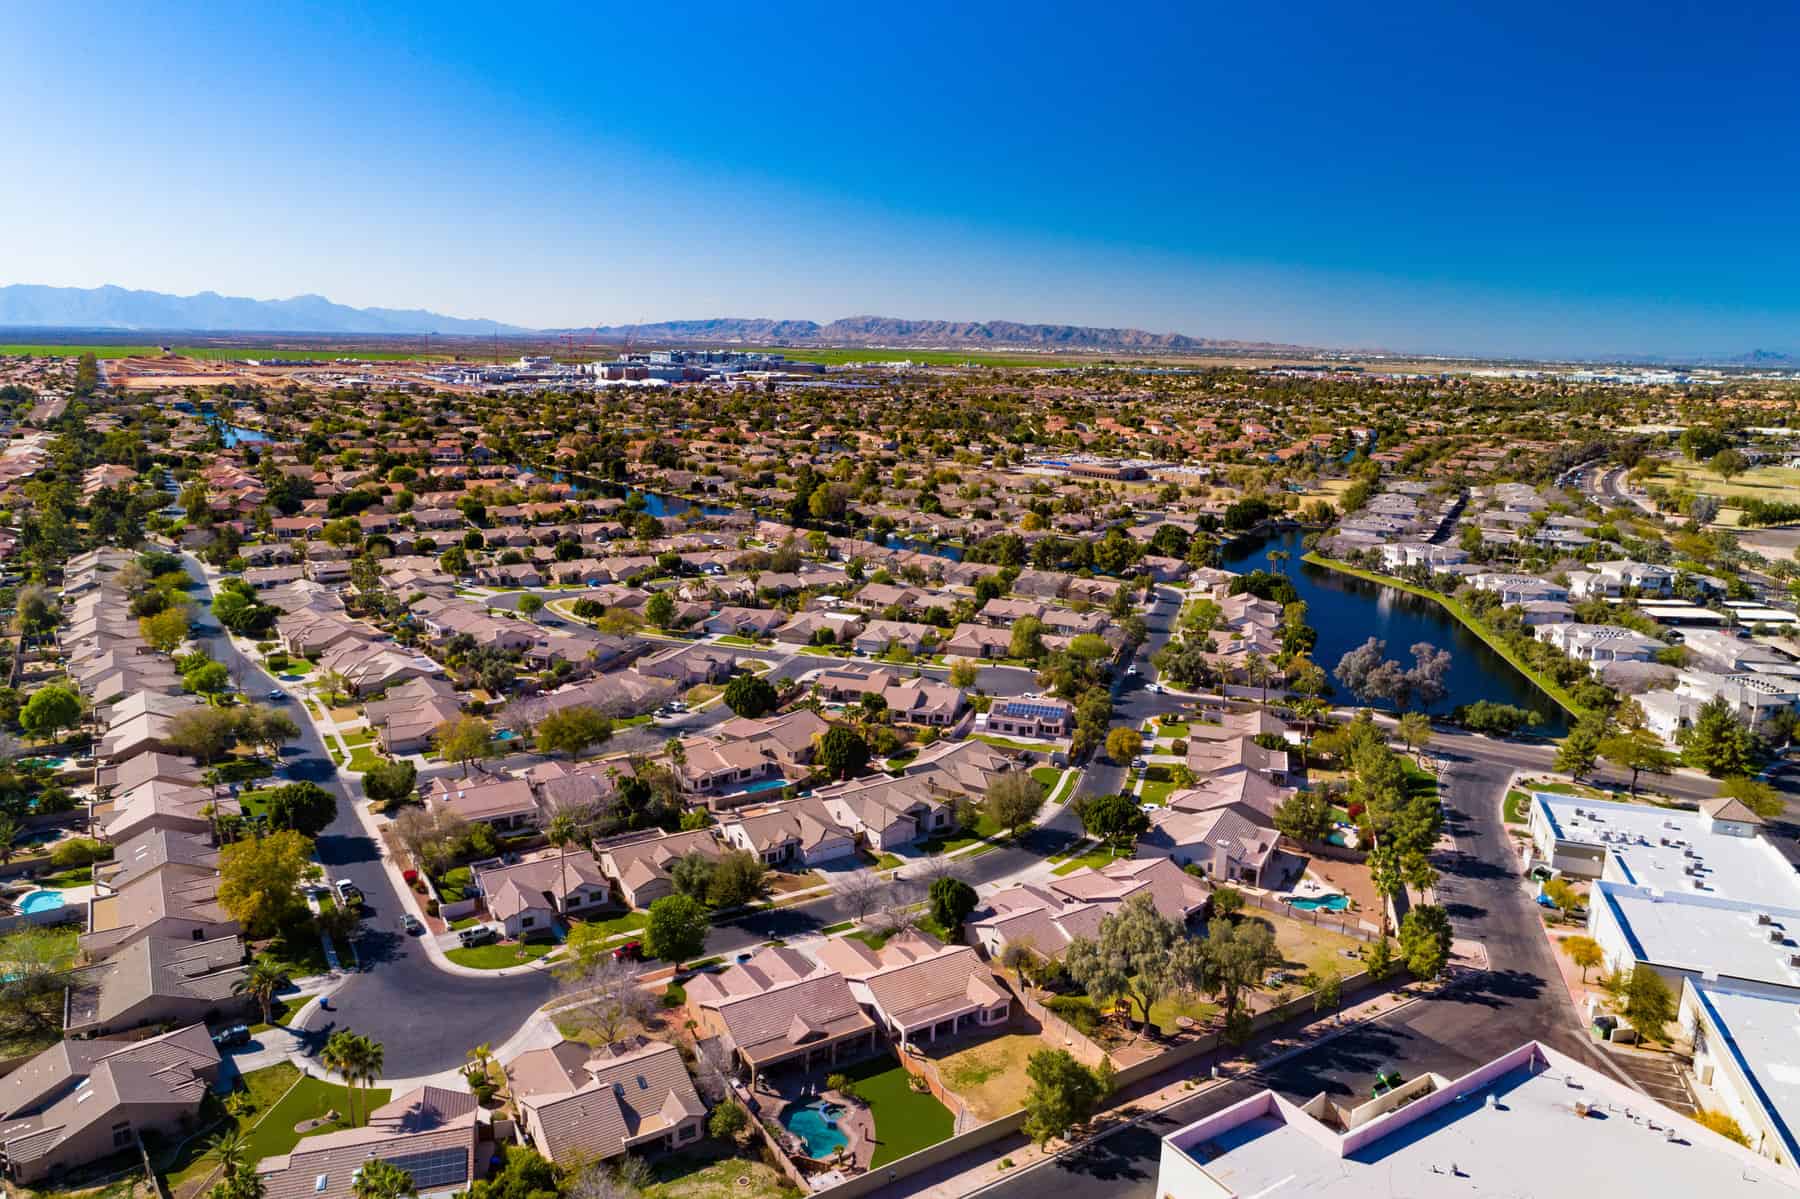 Aerial of residential areas of Chandler, Arizona, with South Mountain and the Sierra Estrella mountain range in the distance.  Chandler is part of the Phoenix Metropolitan Area.